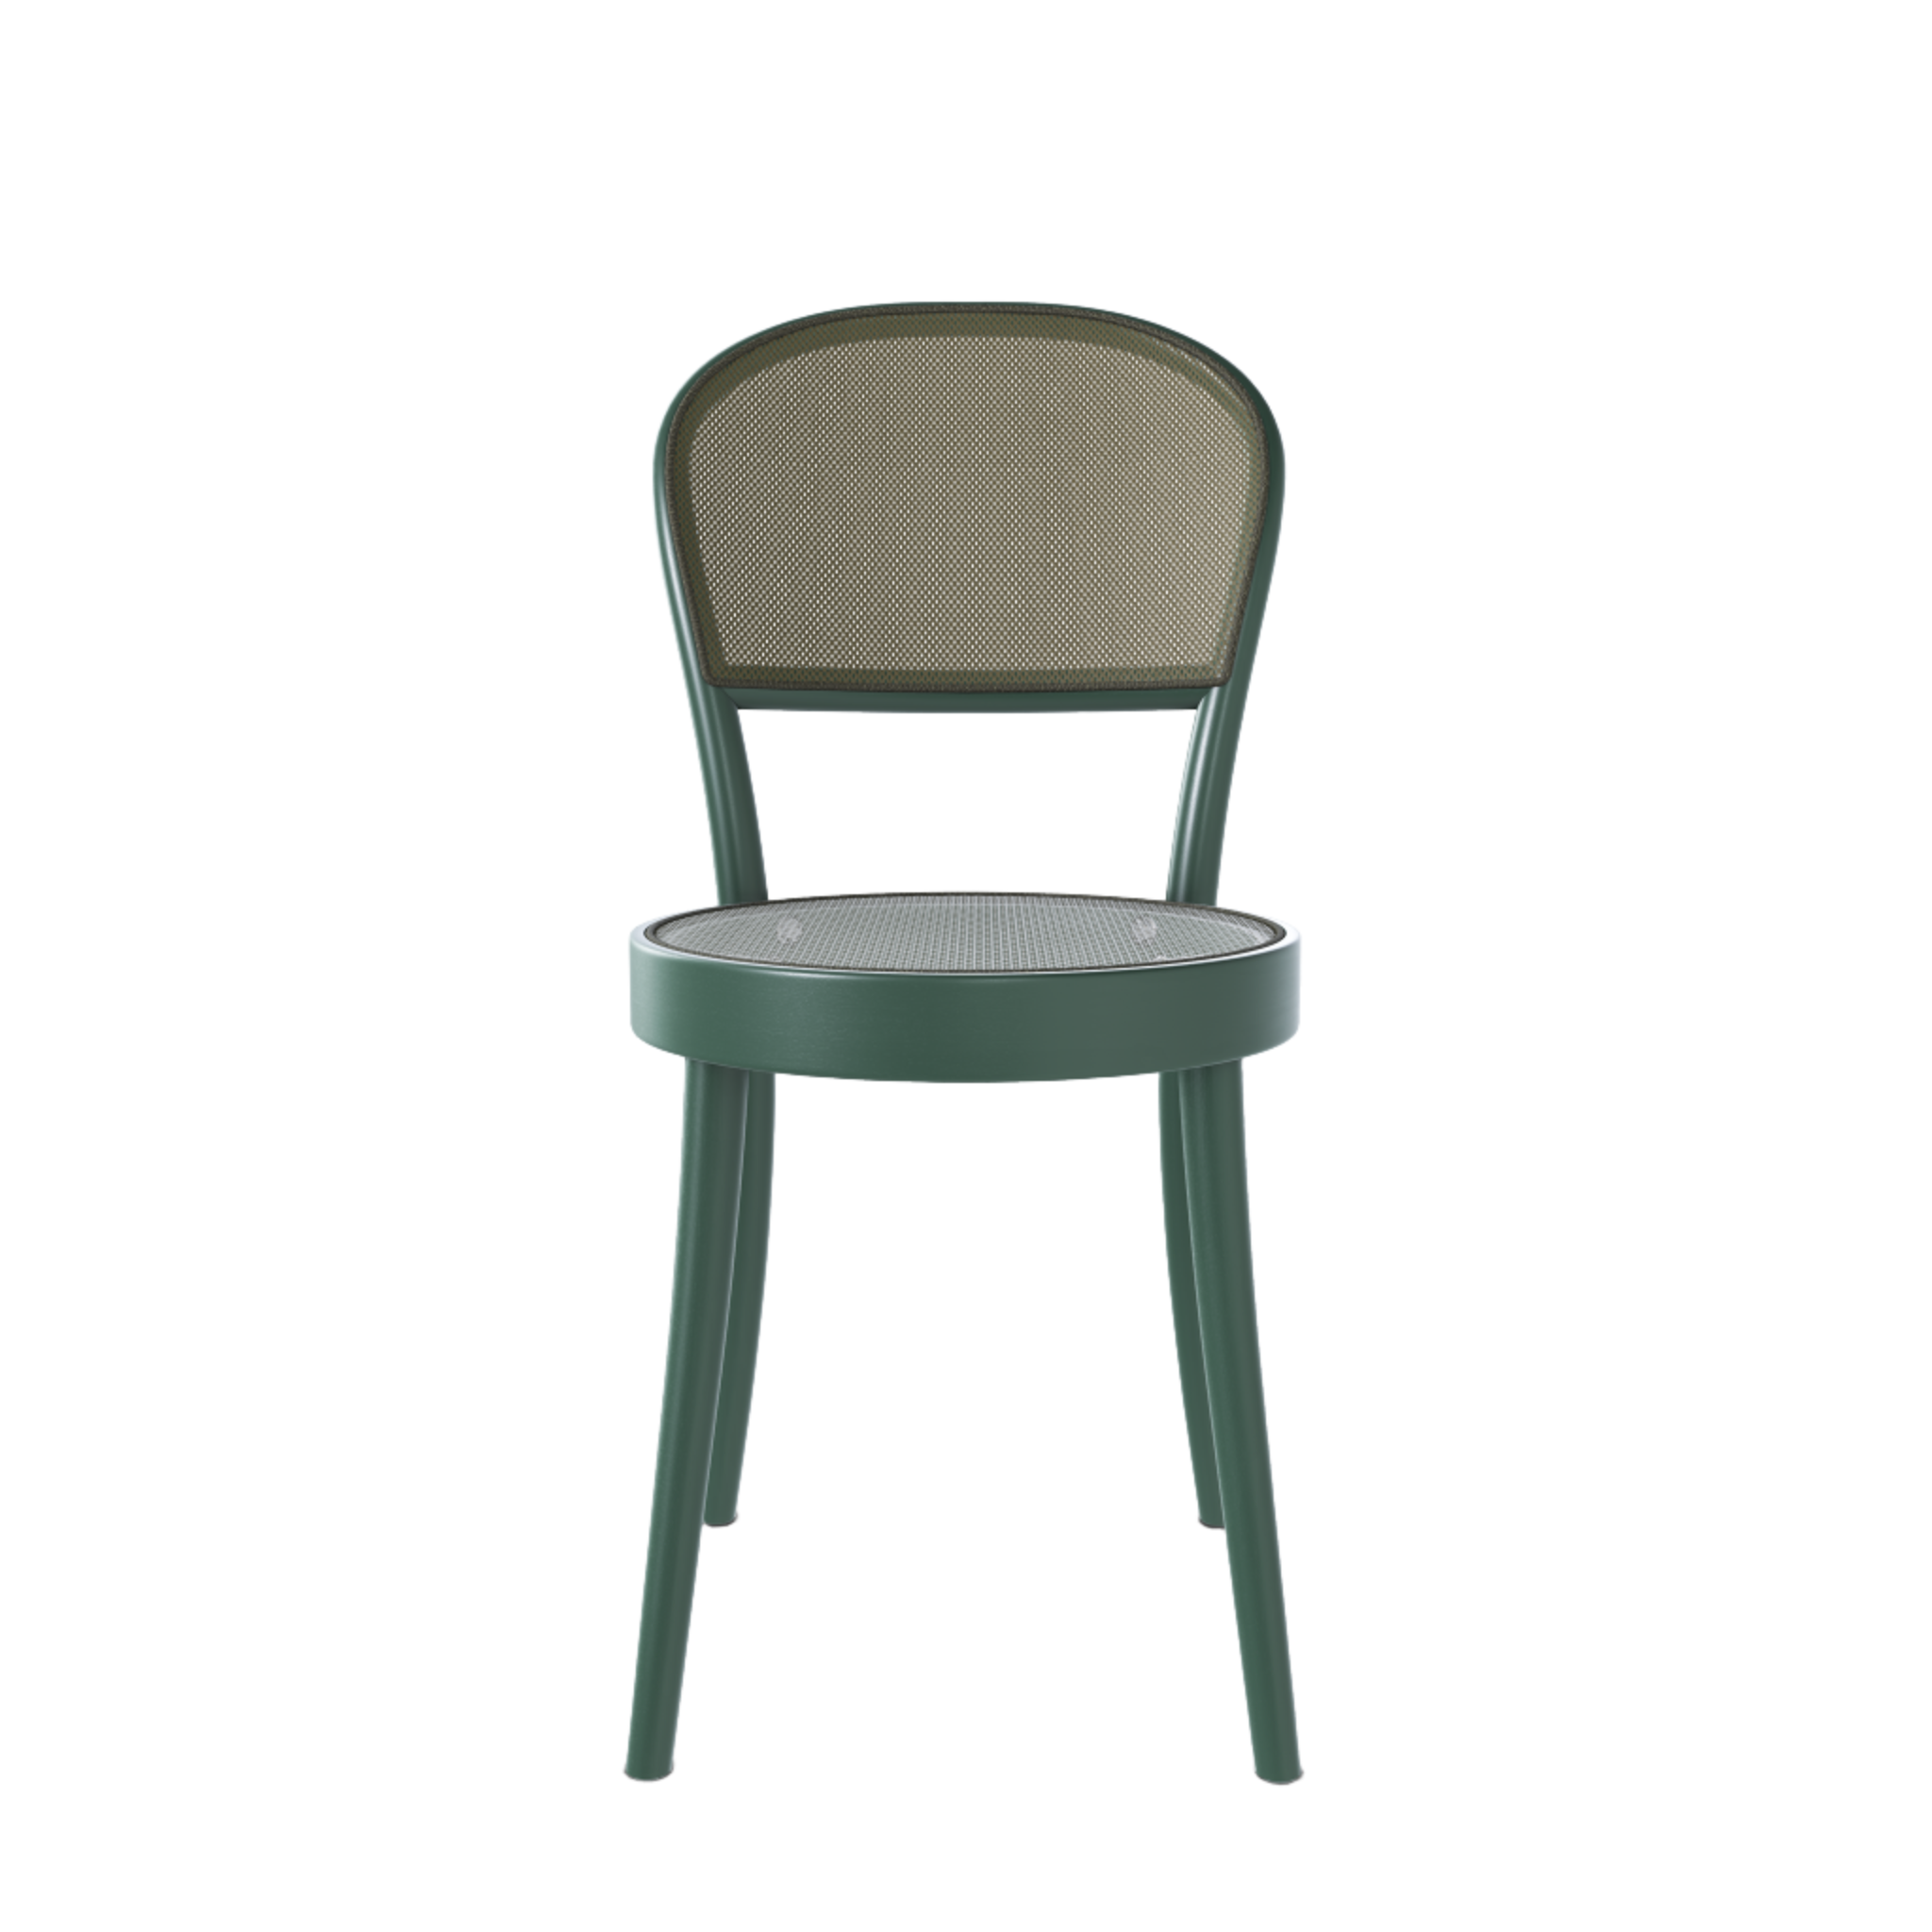 Ton 314 chair with matching seat mesh in forest green